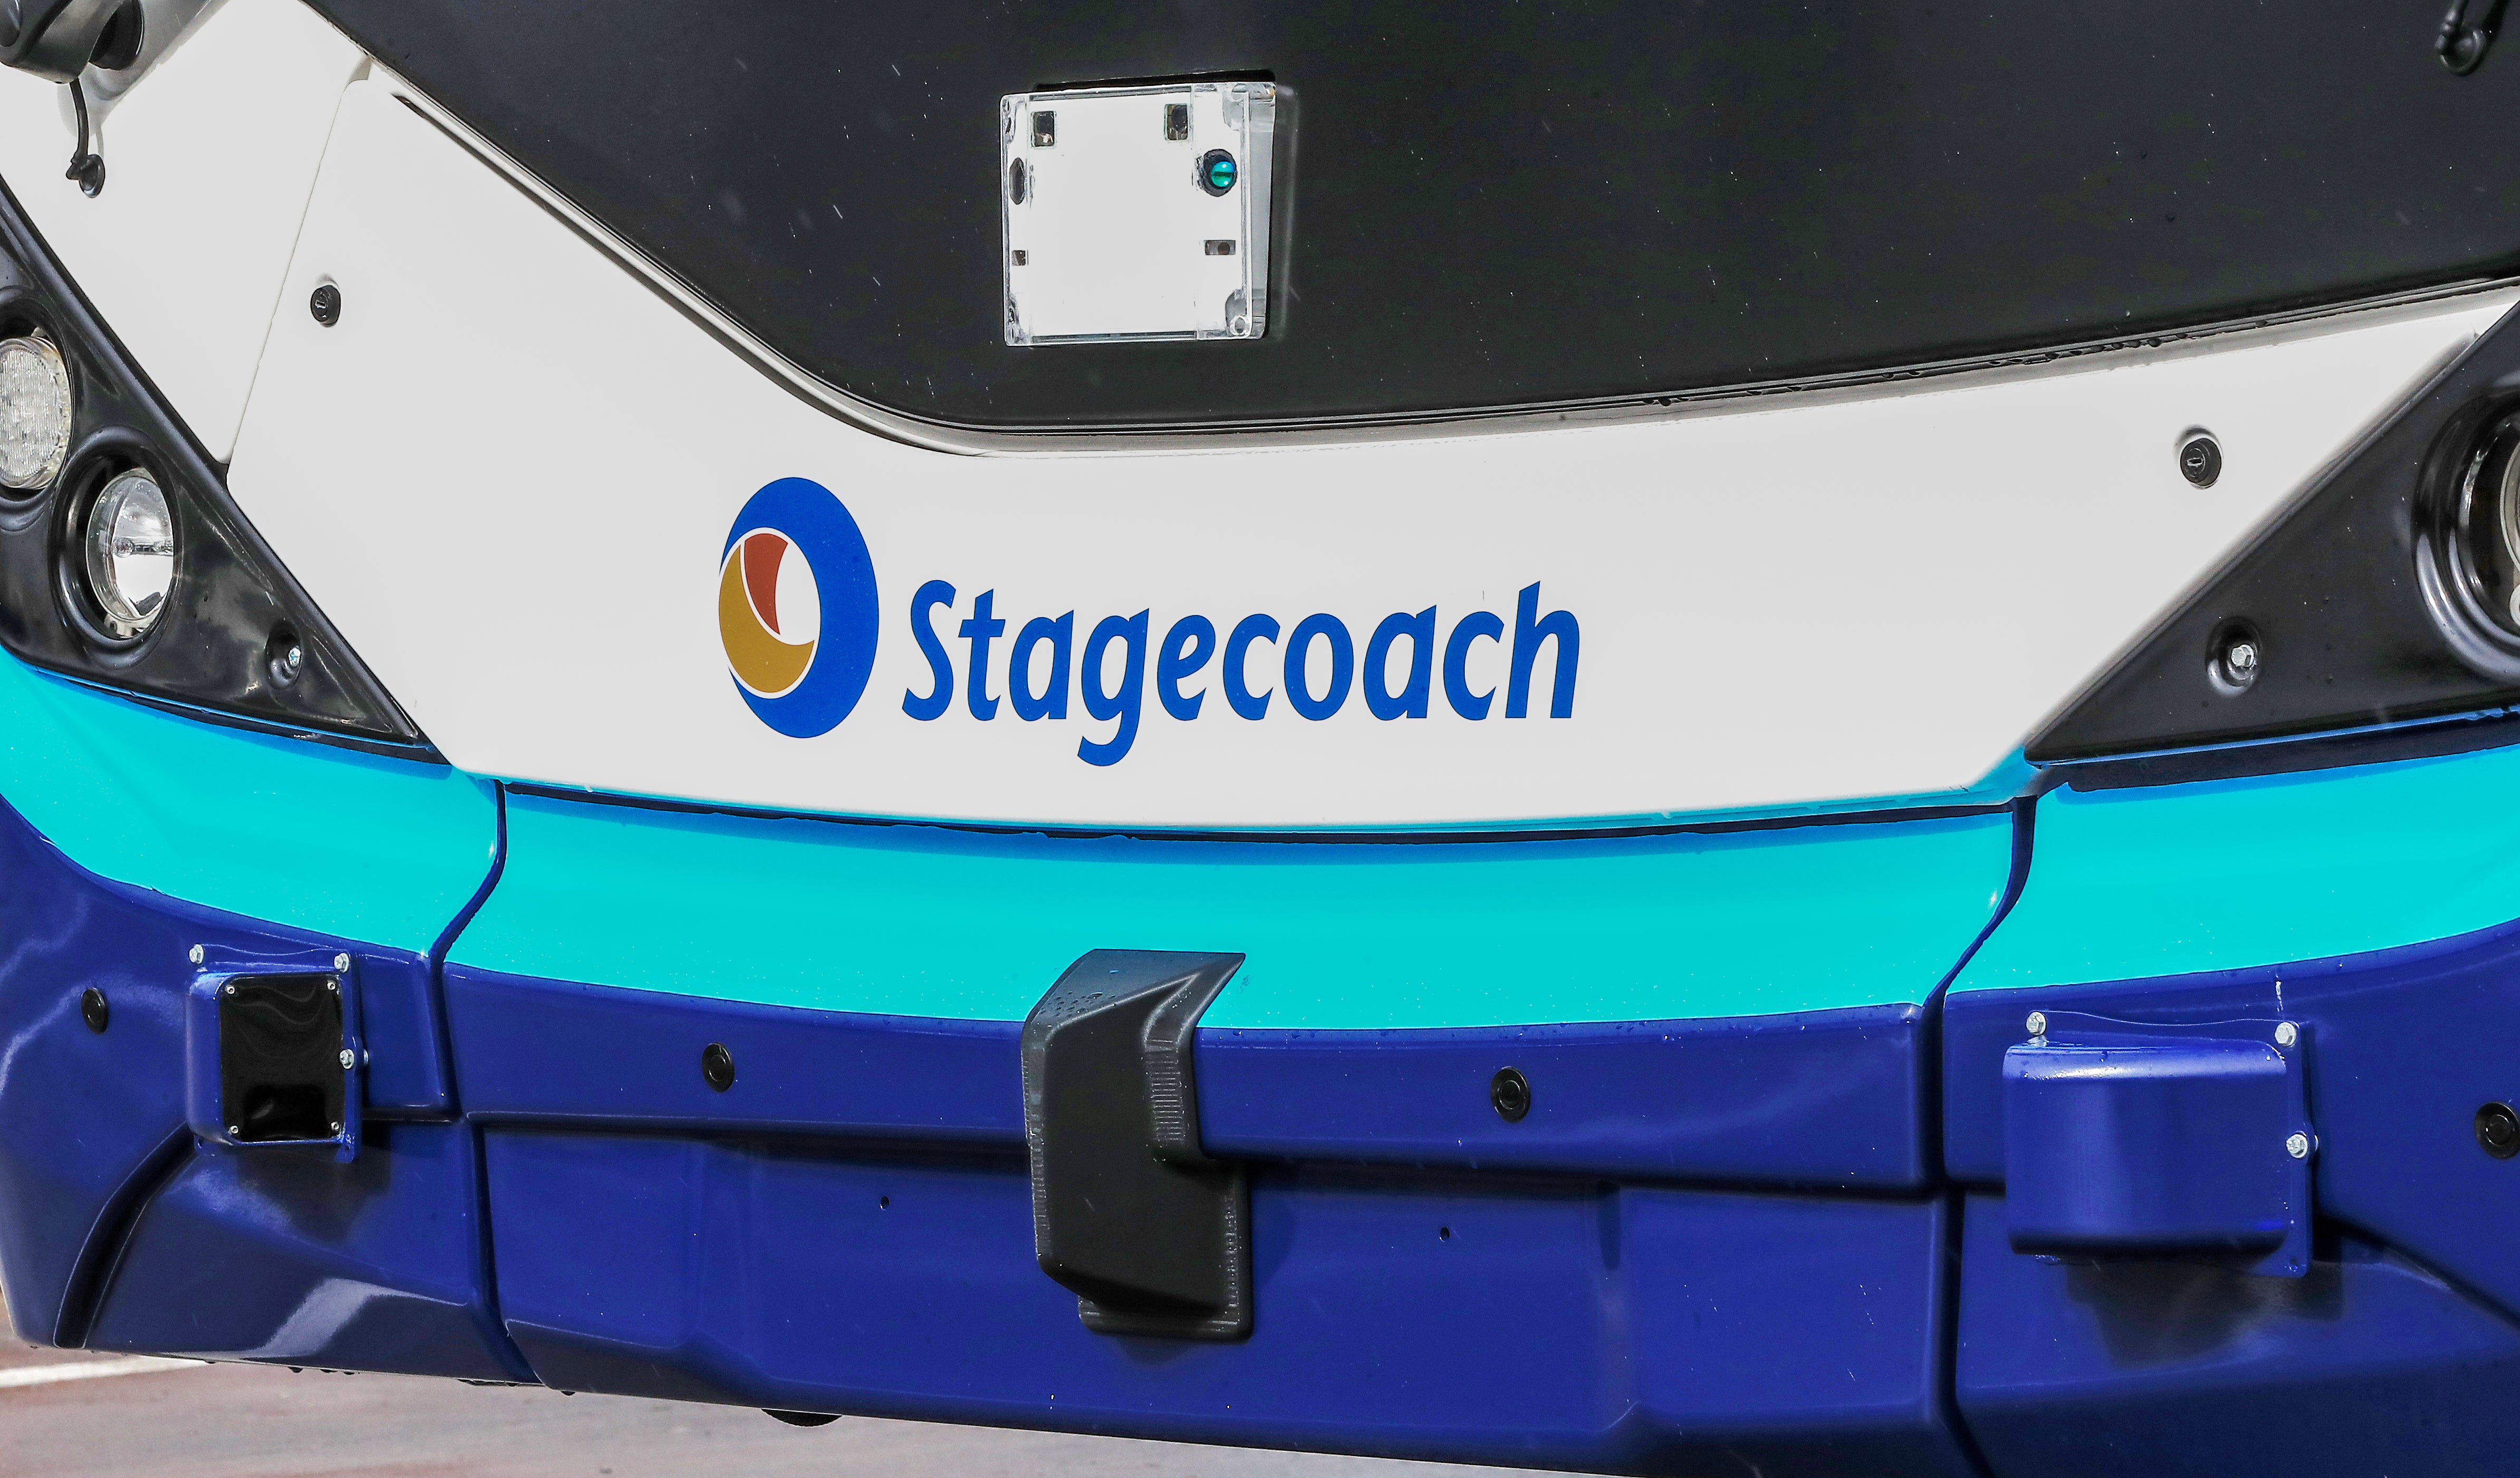 Stagecoach said an investigation has been launched